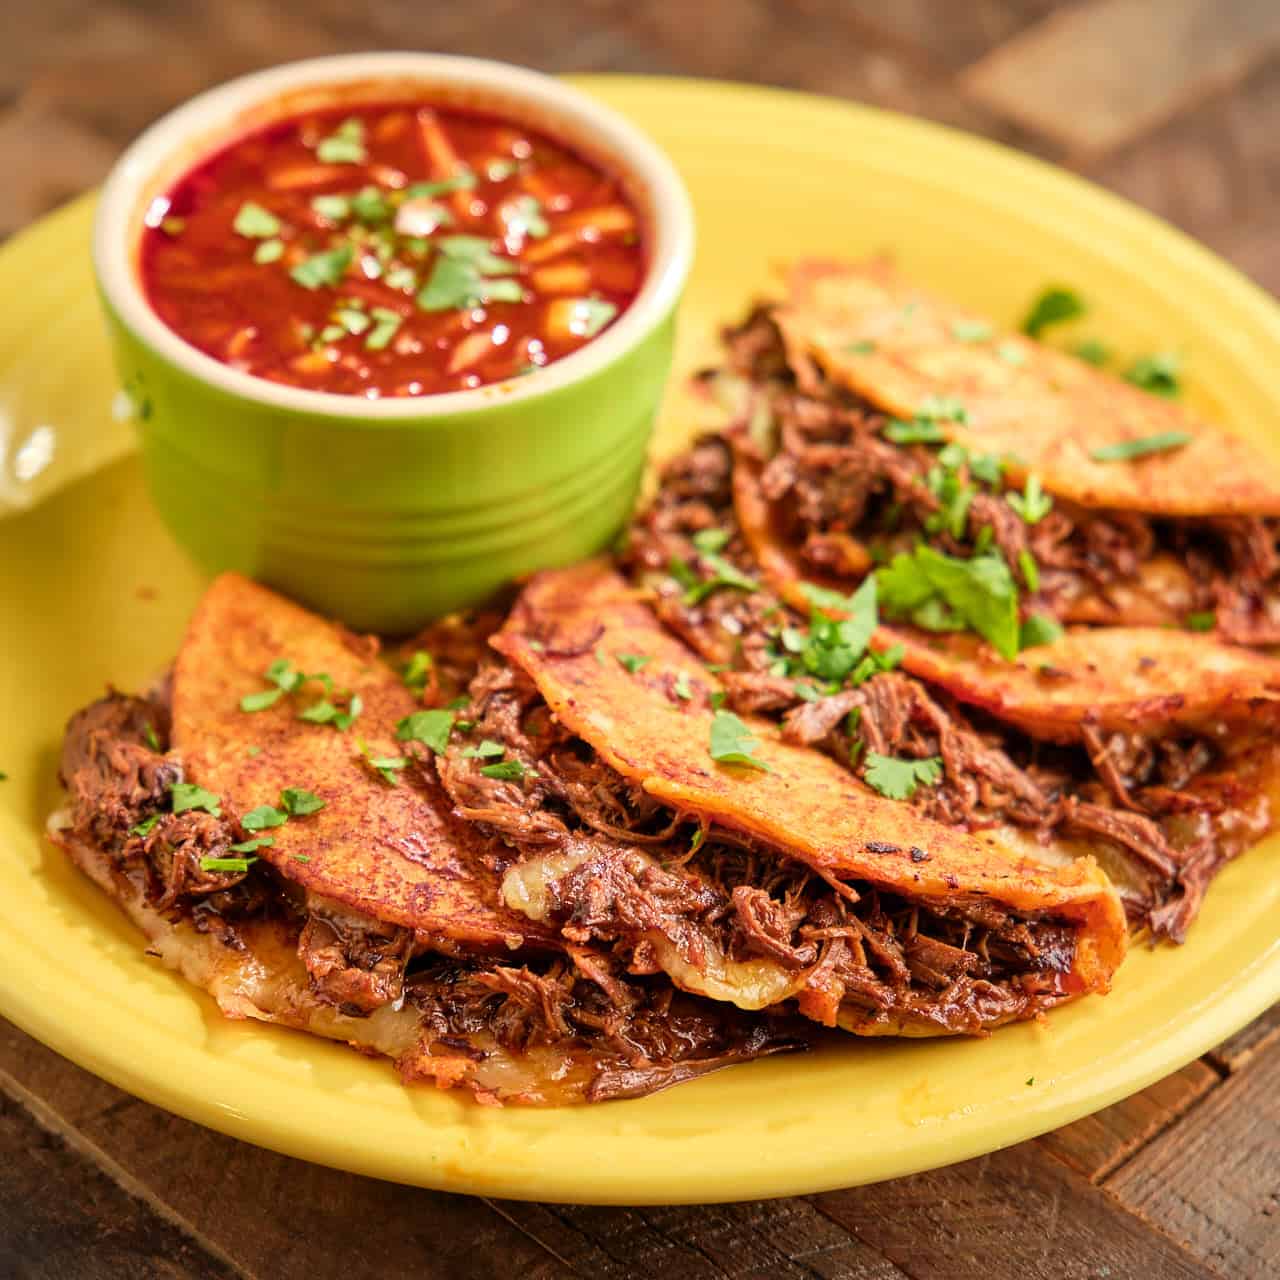 A plate of birria tacos with broth